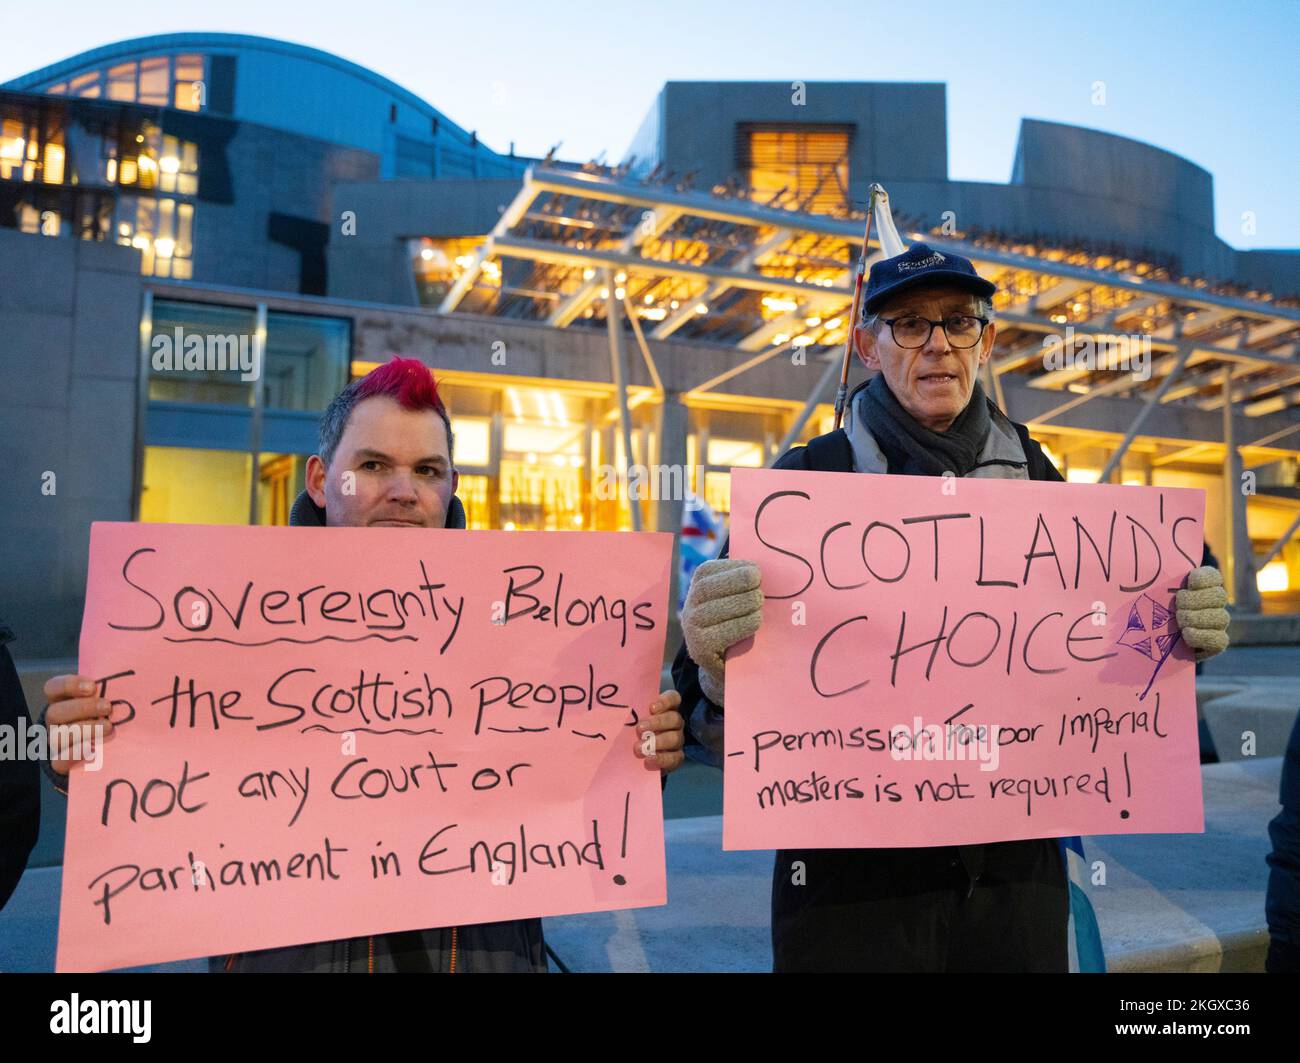 Edinburgh, Scotland, UK. 23rd November 2022. Supporters of Scottish independence gather at the Scottish Parliament building at Holyrood following the Supreme Court ruling that Westminster has sole authority in granting a legal referendum on Scottish independence. Iain Masterton/Alamy Live News Stock Photo